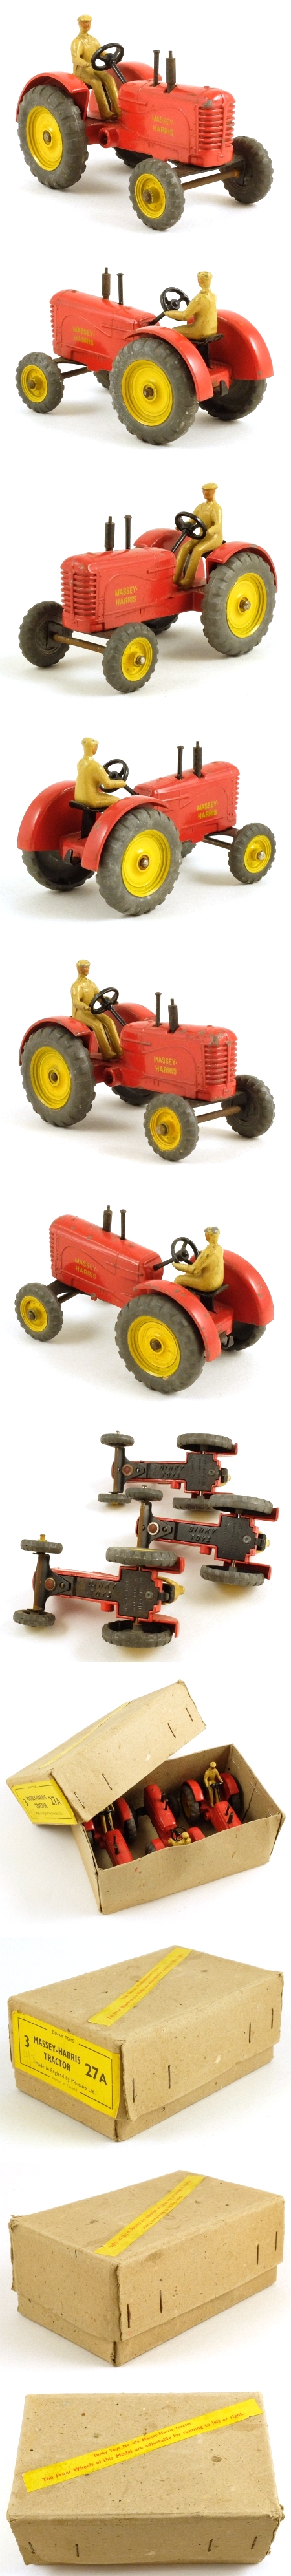 27a Massey-Harris Tractor, trade box of 3